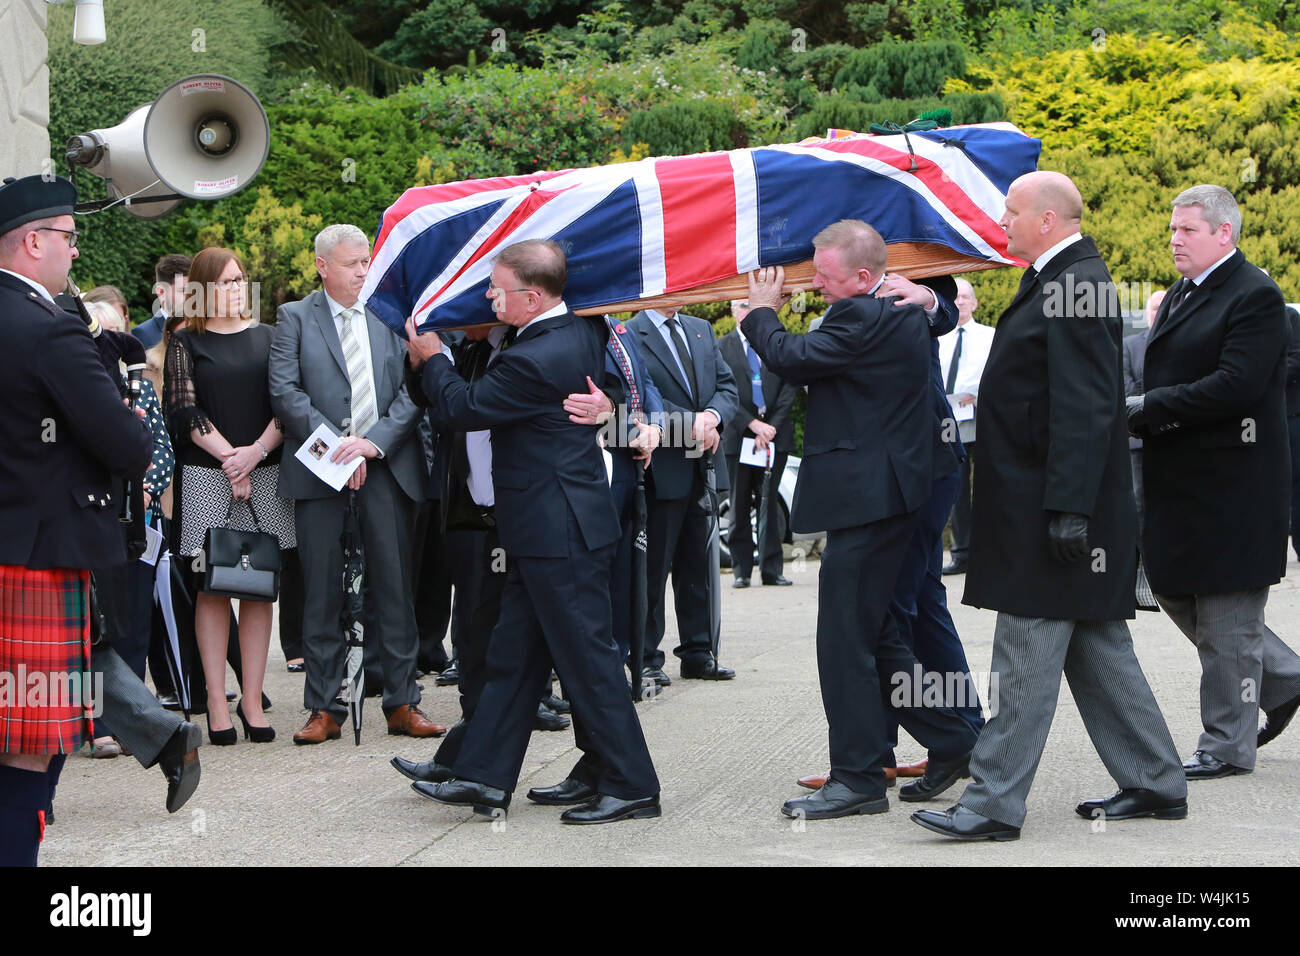 The coffin of Willie Frazer is carried into the Five Mile Hill Full Gospel Fellowship Church on the Maytown Road, County Armagh, Monday July 1st, 2019. (Photo by Paul McErlane for the Belfast Telegraph) Stock Photo